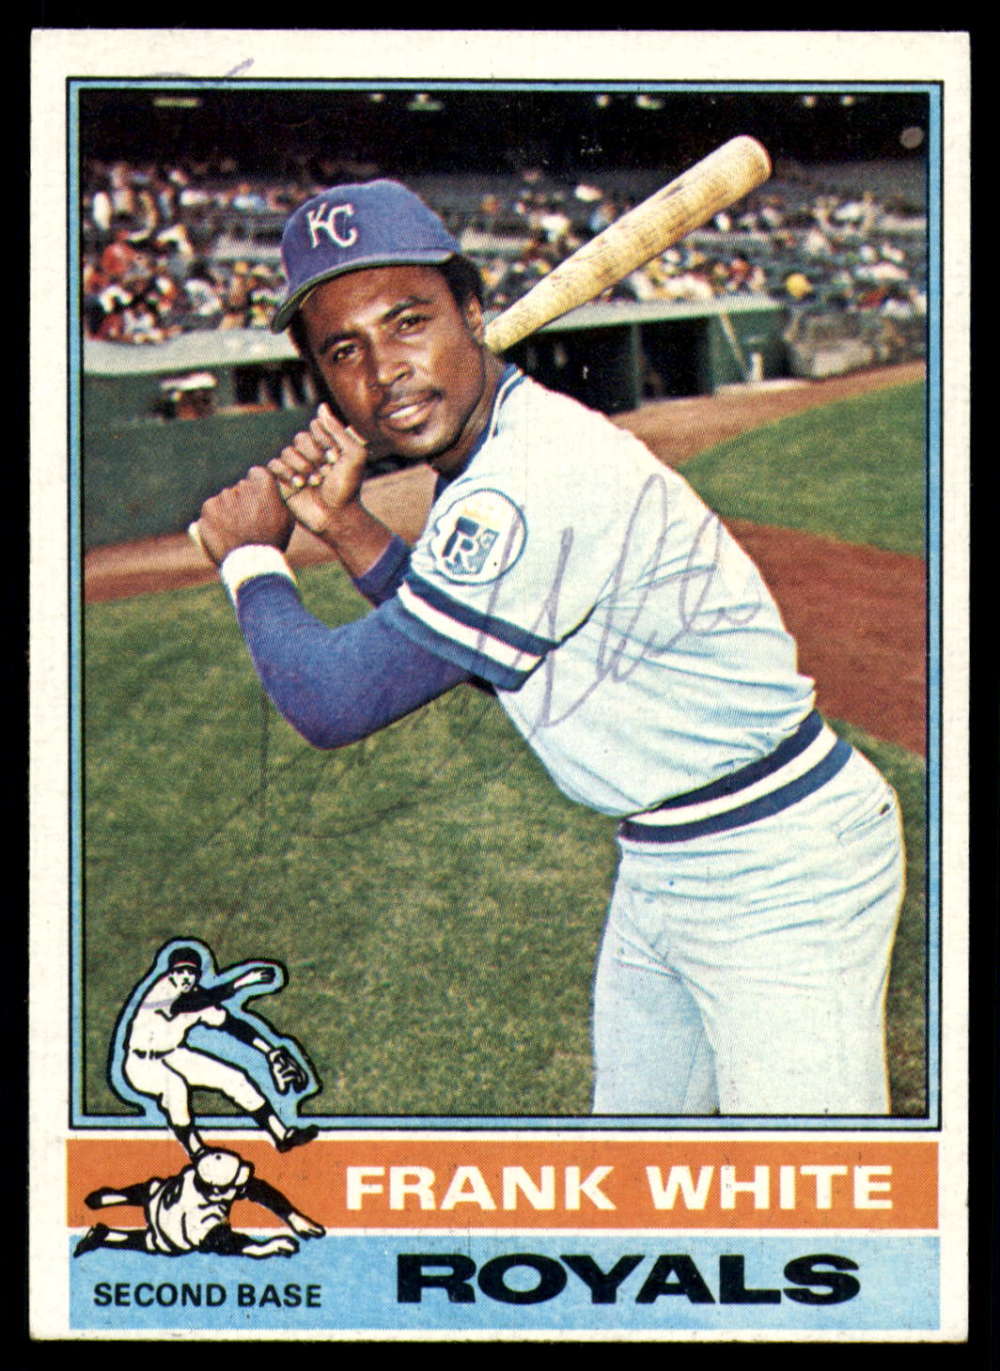 Frank White 1985 Kansas City Royals Cooperstown Home Throwback MLB